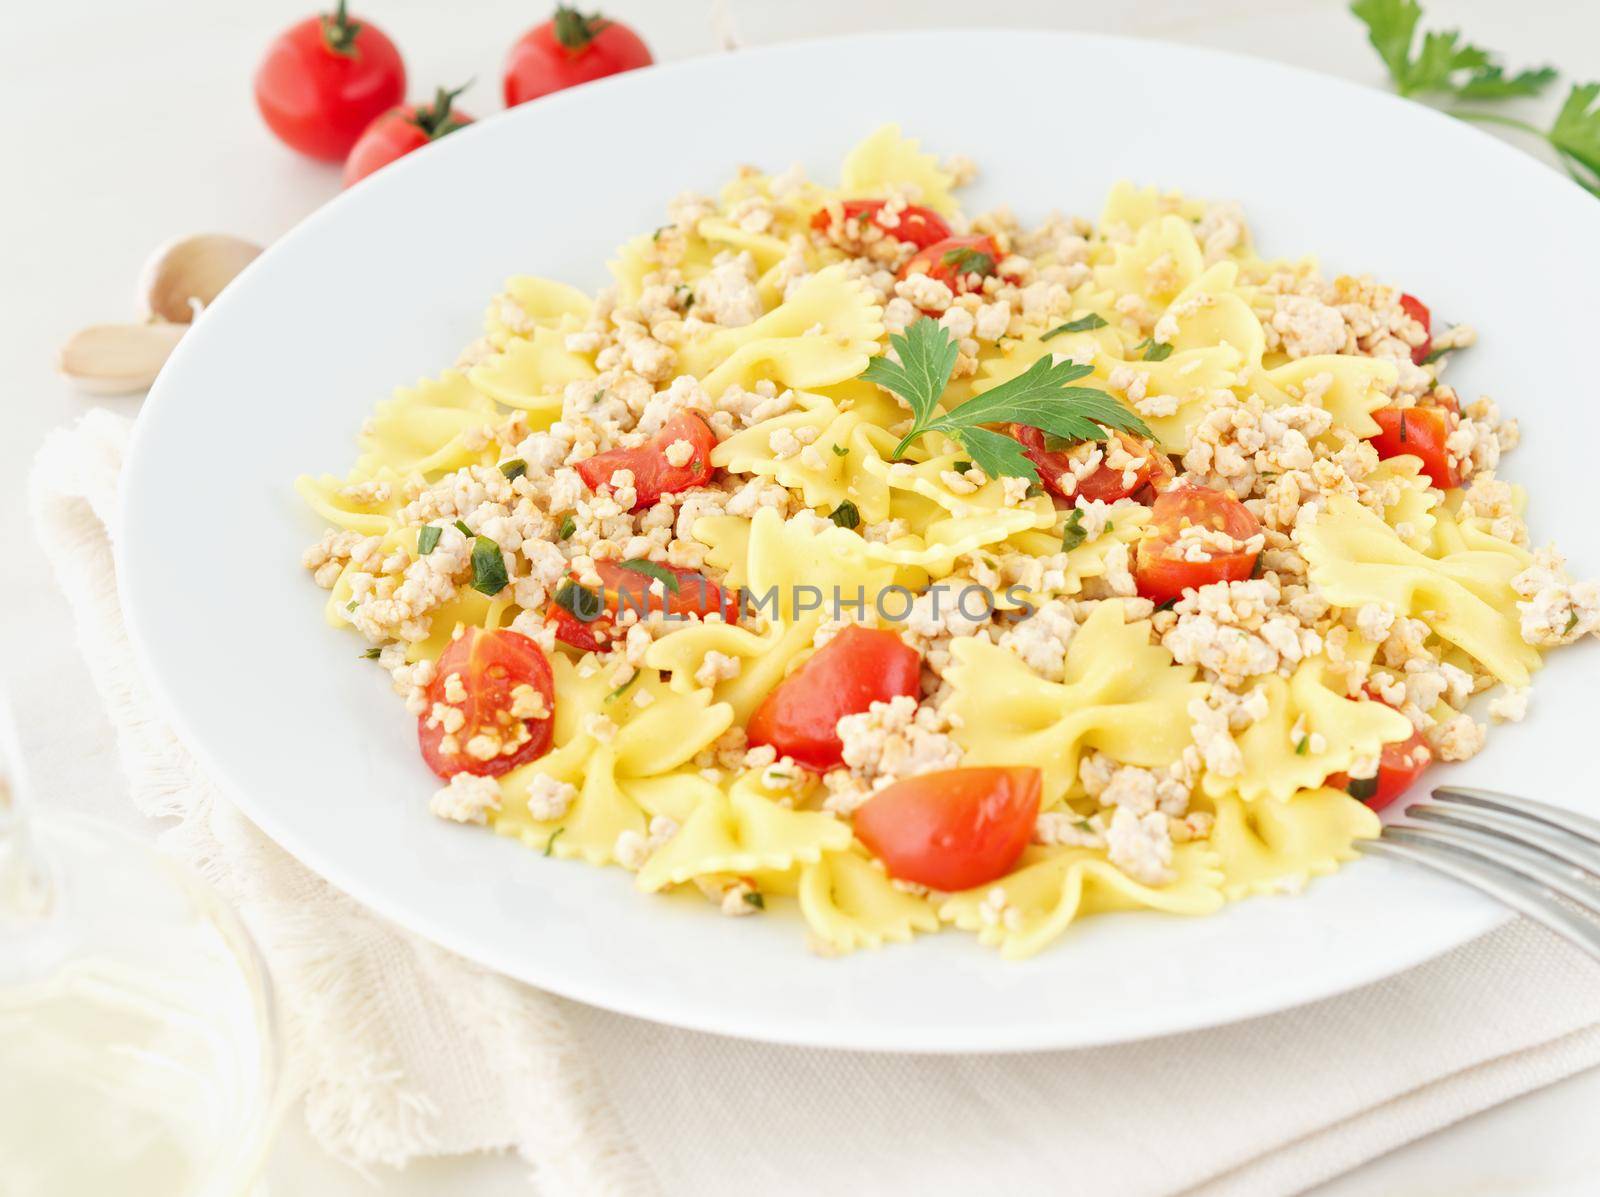 farfalle pasta with tomatoes, chiken meat, parsley on white stone background, low-calorie diet, the side view